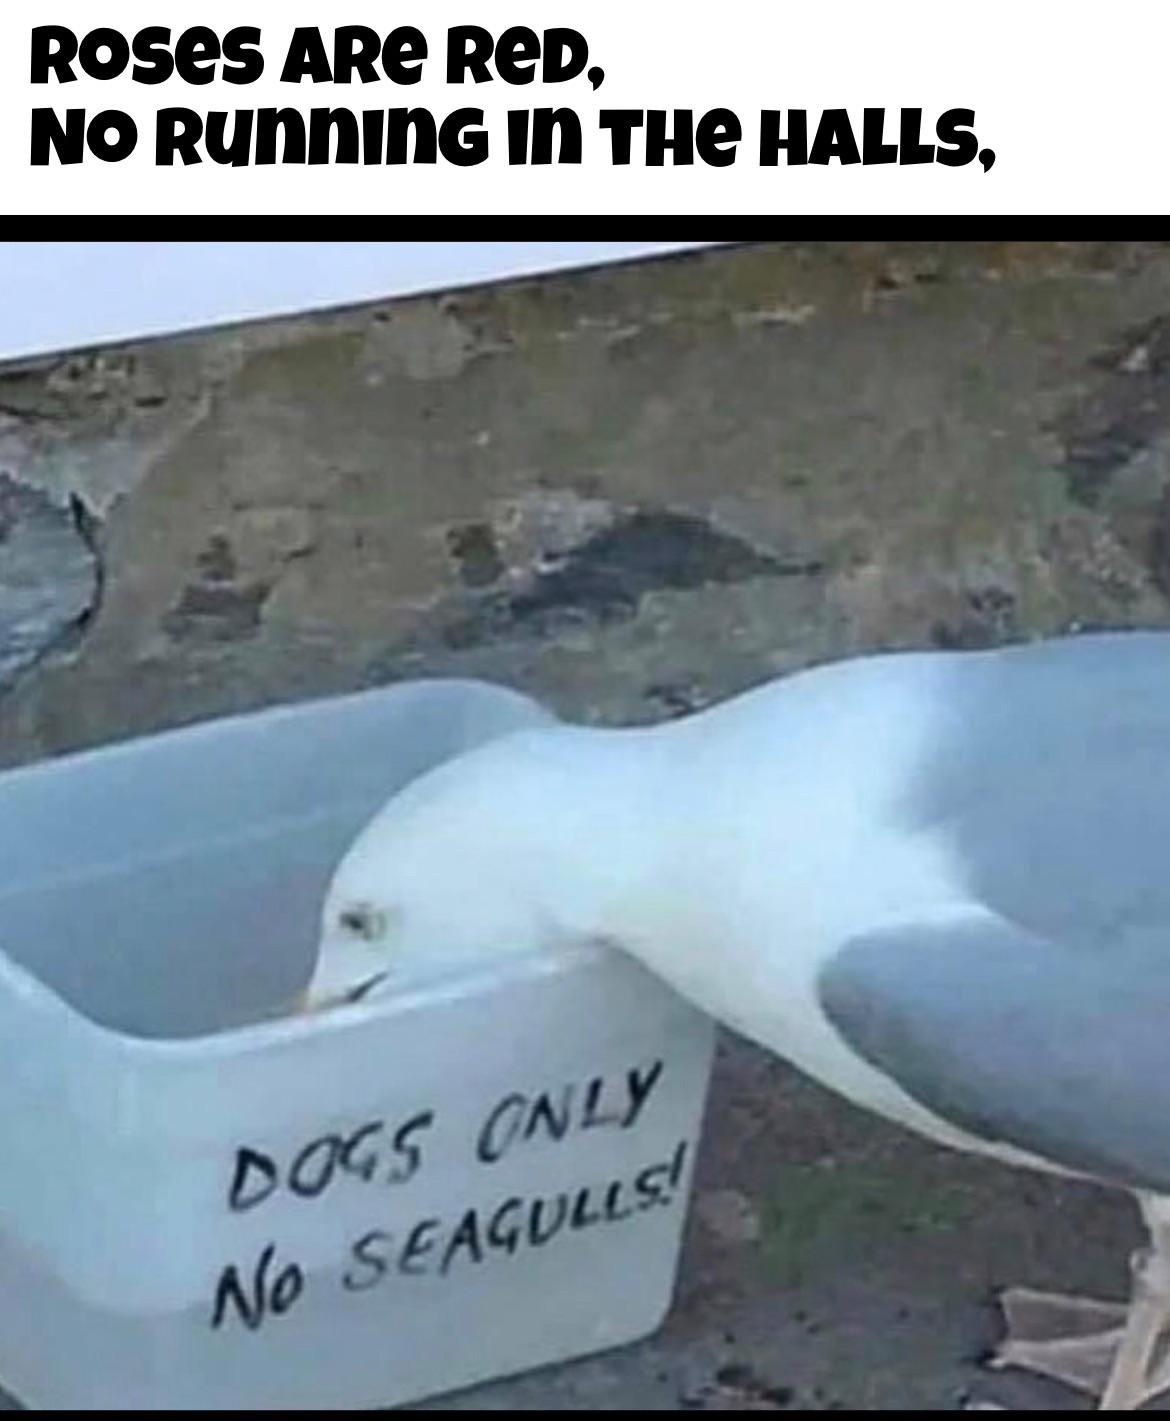 funny pics and memes - fauna - Roses ARe Red, No RunninG In The Halls, Dogs Only No Seagulls